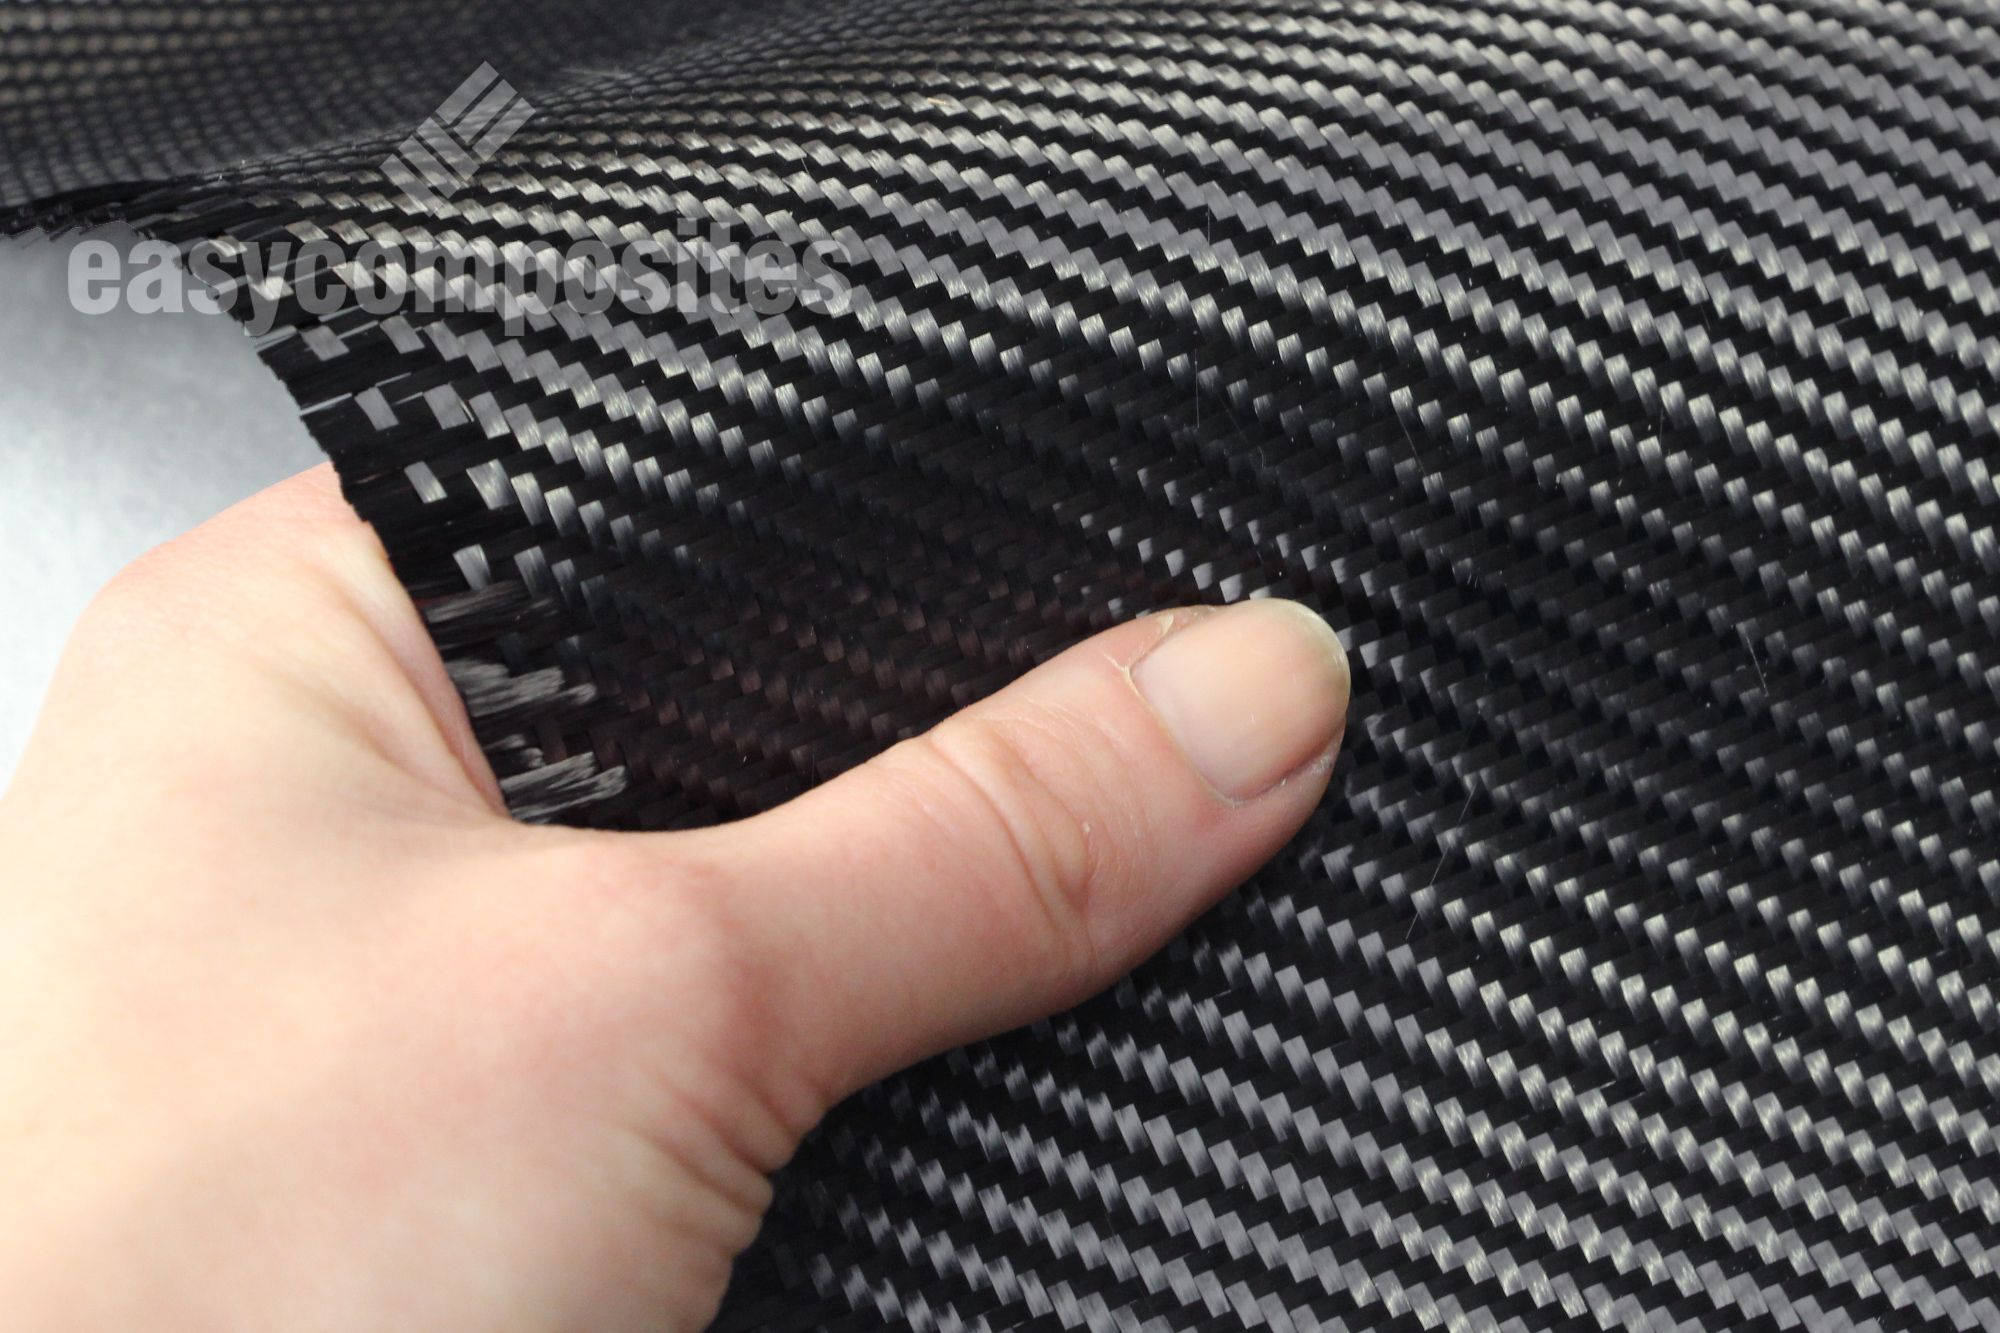 https://media.easycomposites.co.uk/products/extralarge/CF-22-240-240g-2x2-twill-3k-carbon-fibre-in-hand-closup.jpg